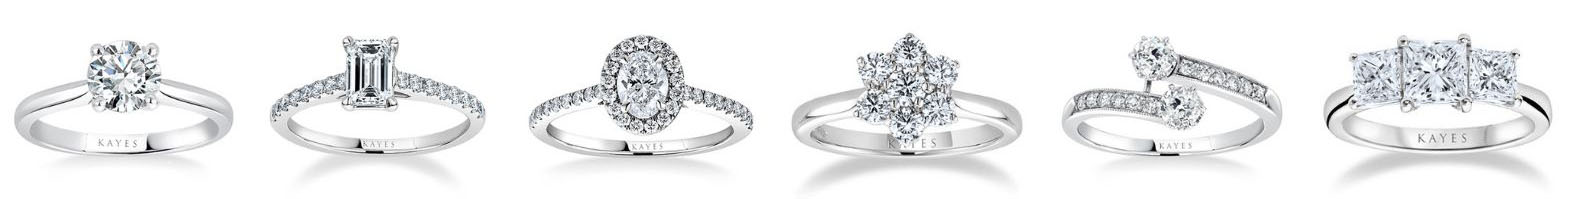 Kayes Jewellers - Engagement Ring Styles | Solitaire, Solitaire Plus, Halo, Cluster, Duet, Trilogy.